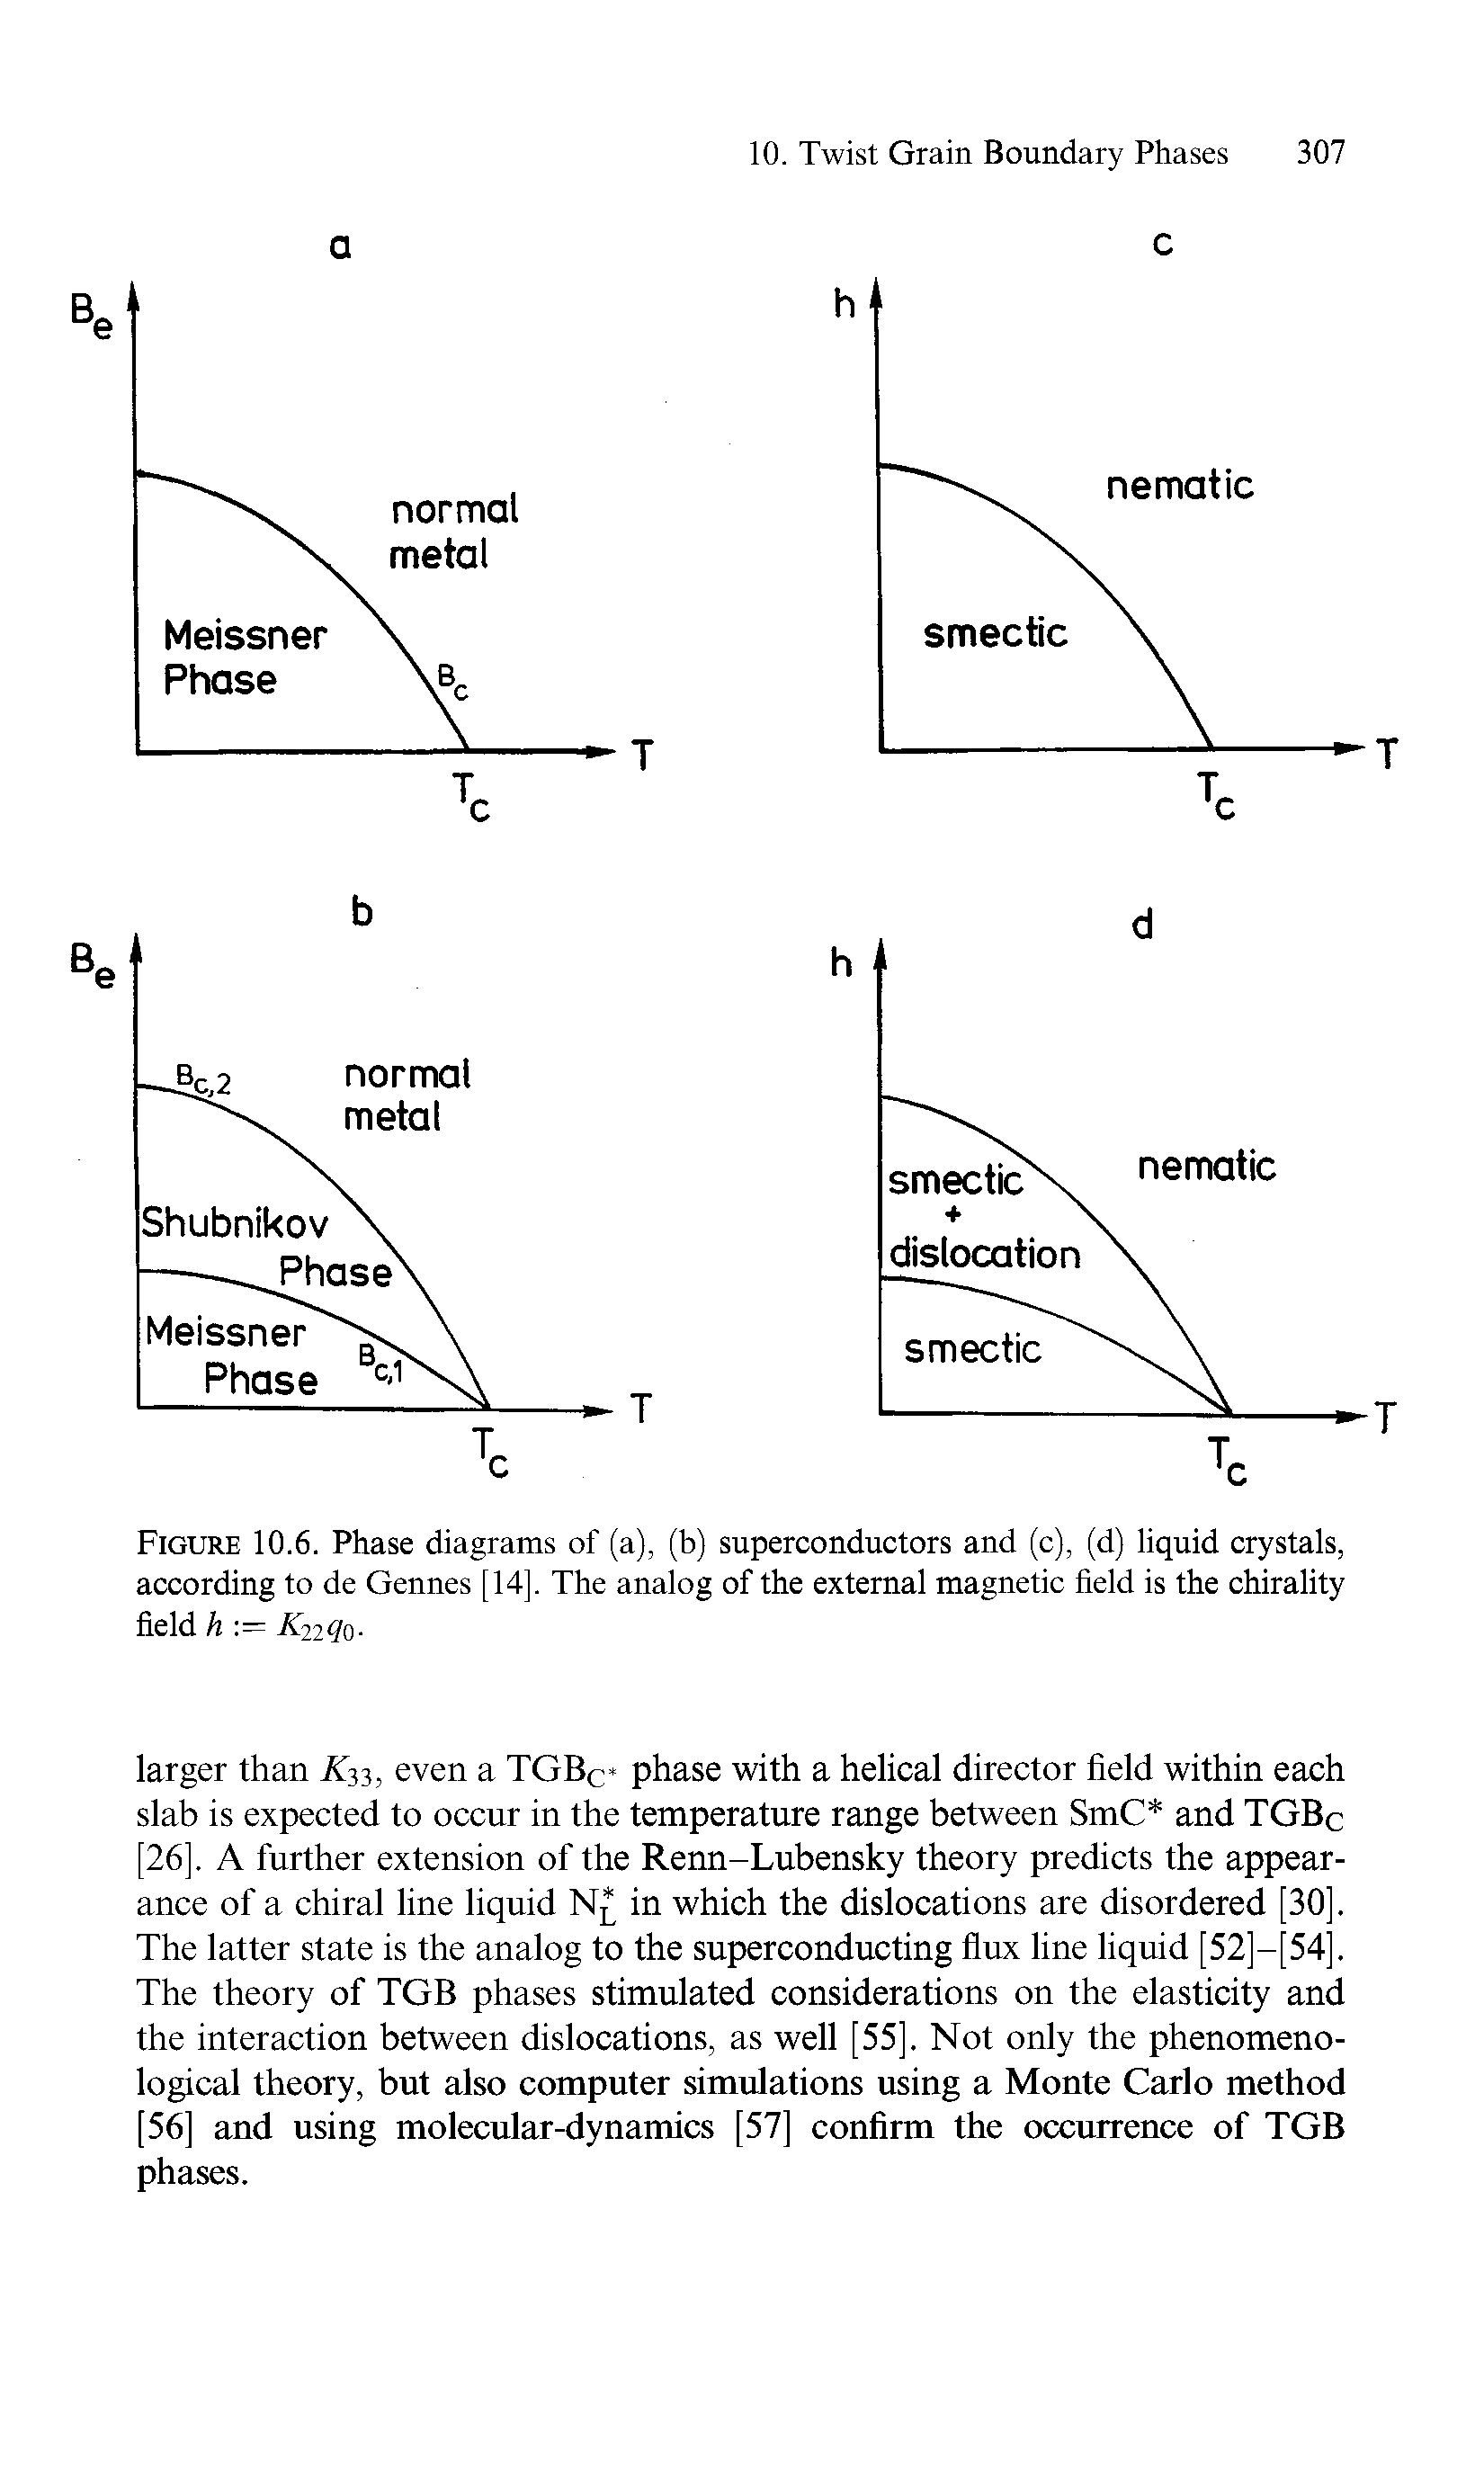 Figure 10.6. Phase diagrams of (a), (b) superconductors and (c), (d) liquid crystals, according to de Gennes [14]. The analog of the external magnetic field is the chirality field h = Kiigo-...